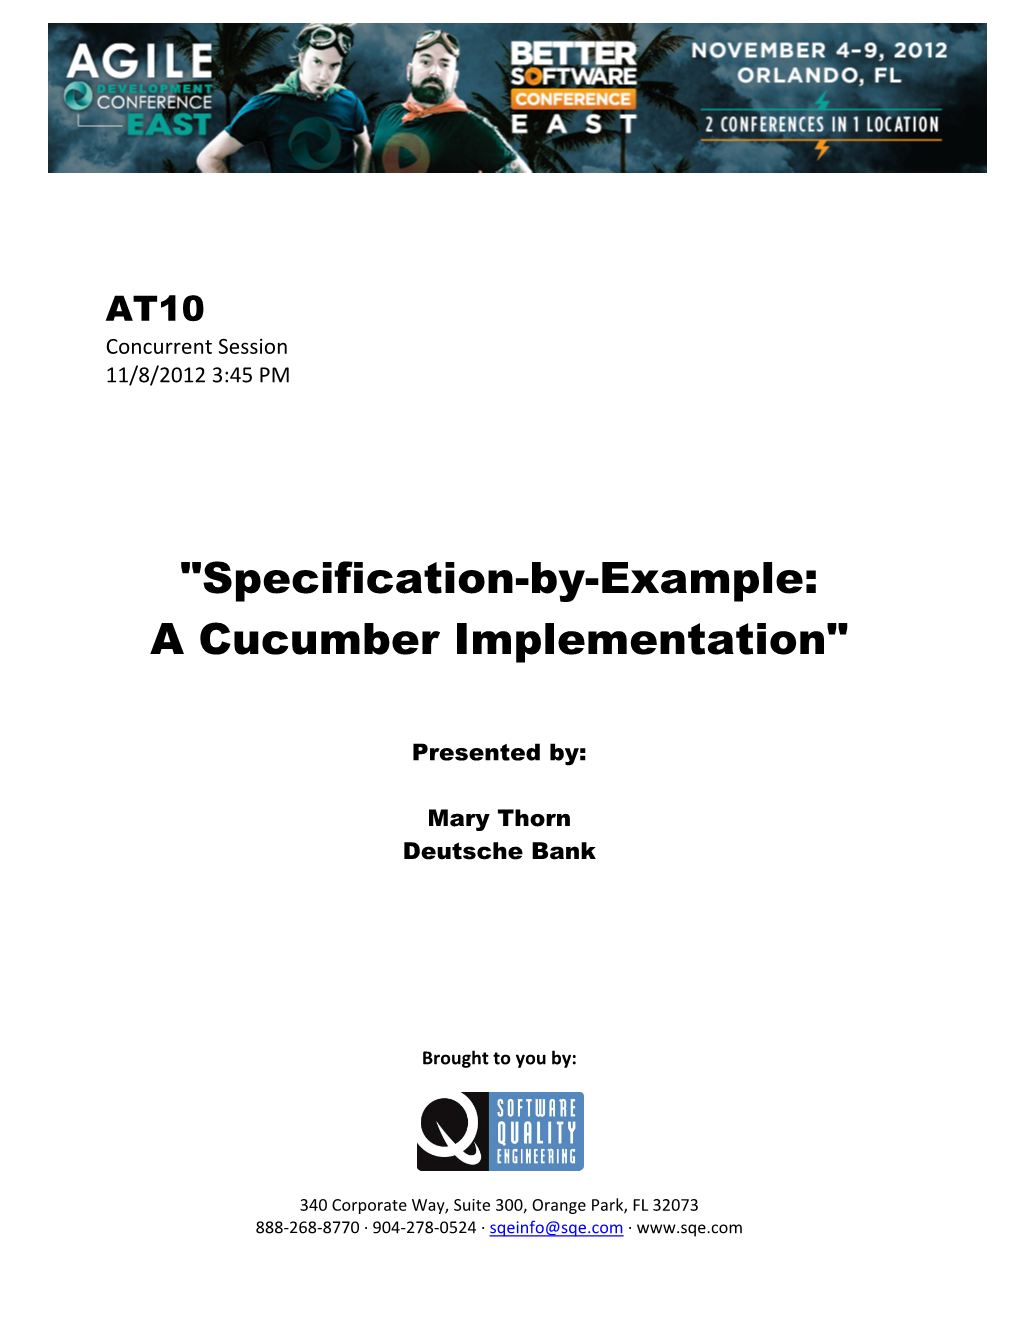 "Specification-By-Example: a Cucumber Implementation"